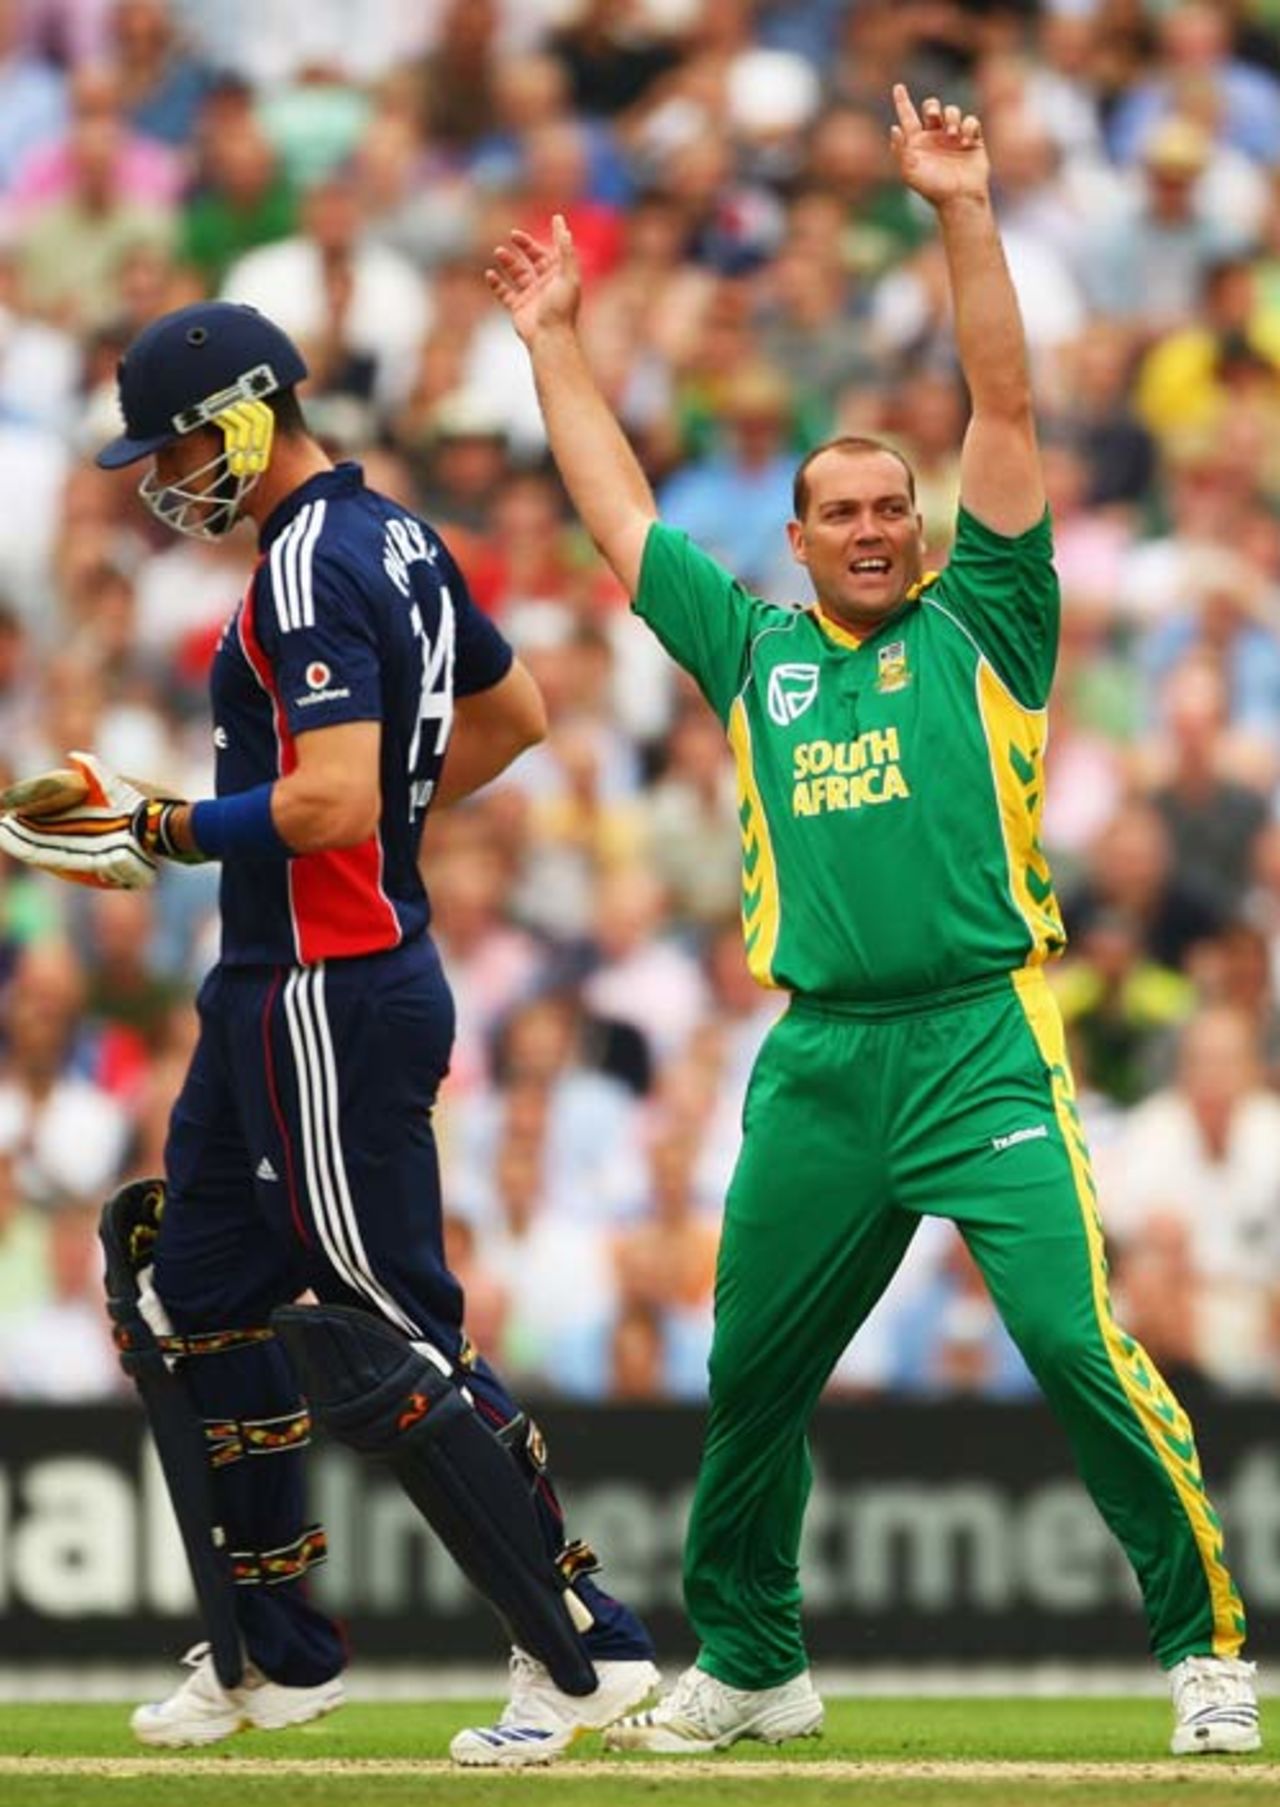 Jacques Kallis, South Africa's stand-in captain, celebrates the key wicket of Kevin Pietersen, England v South Africa, 3rd ODI, The Oval, August 29, 2008